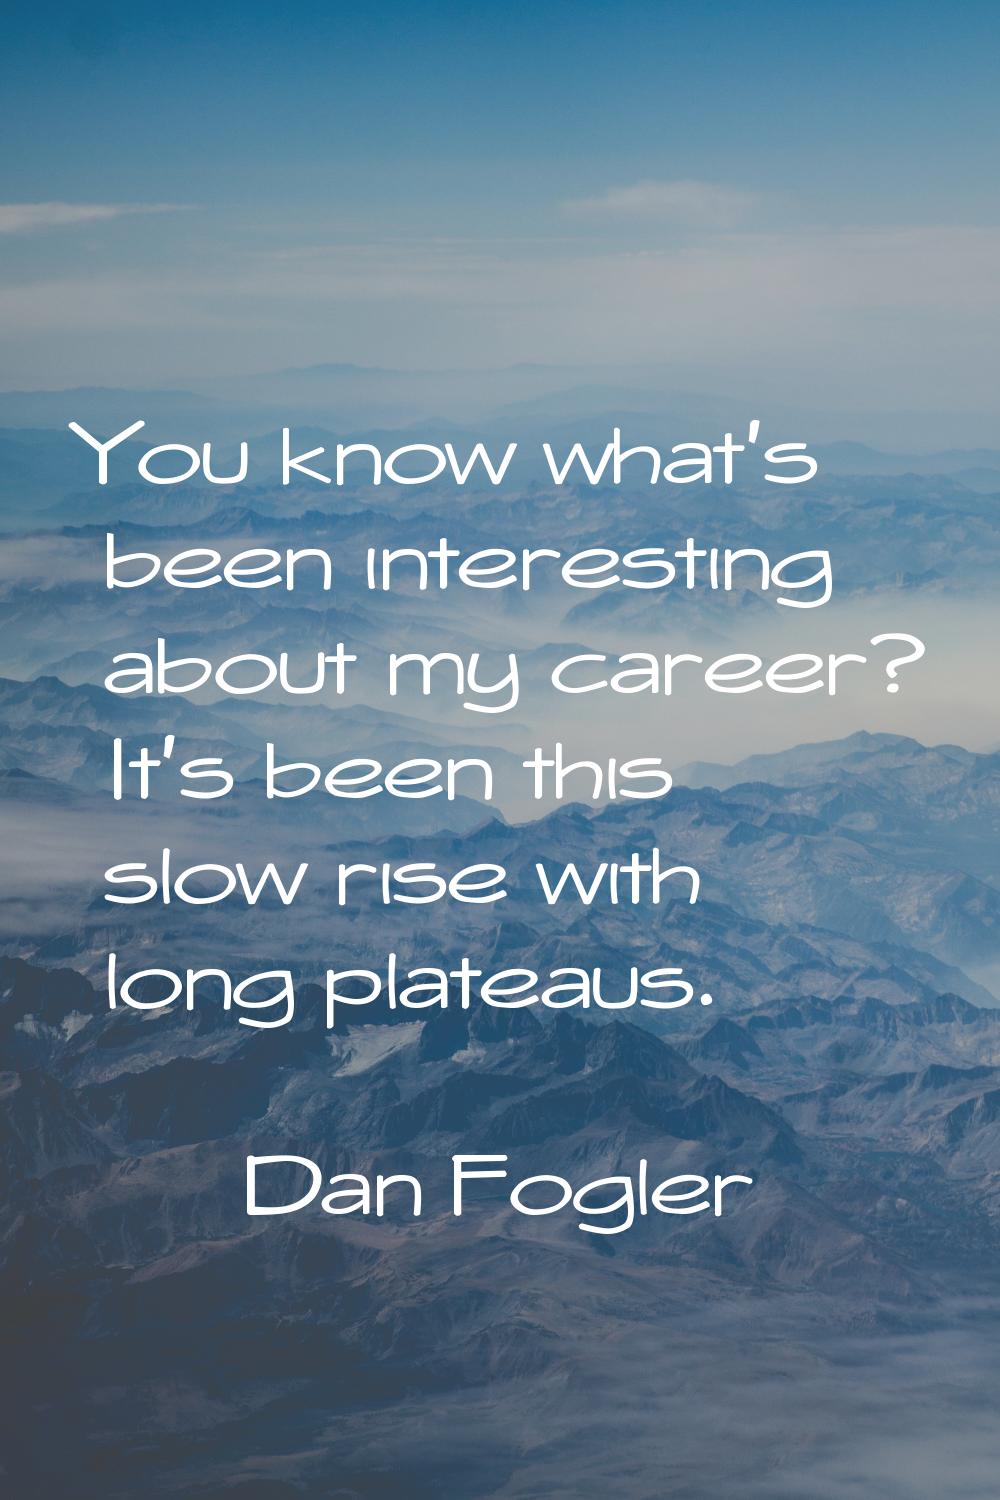 You know what's been interesting about my career? It's been this slow rise with long plateaus.